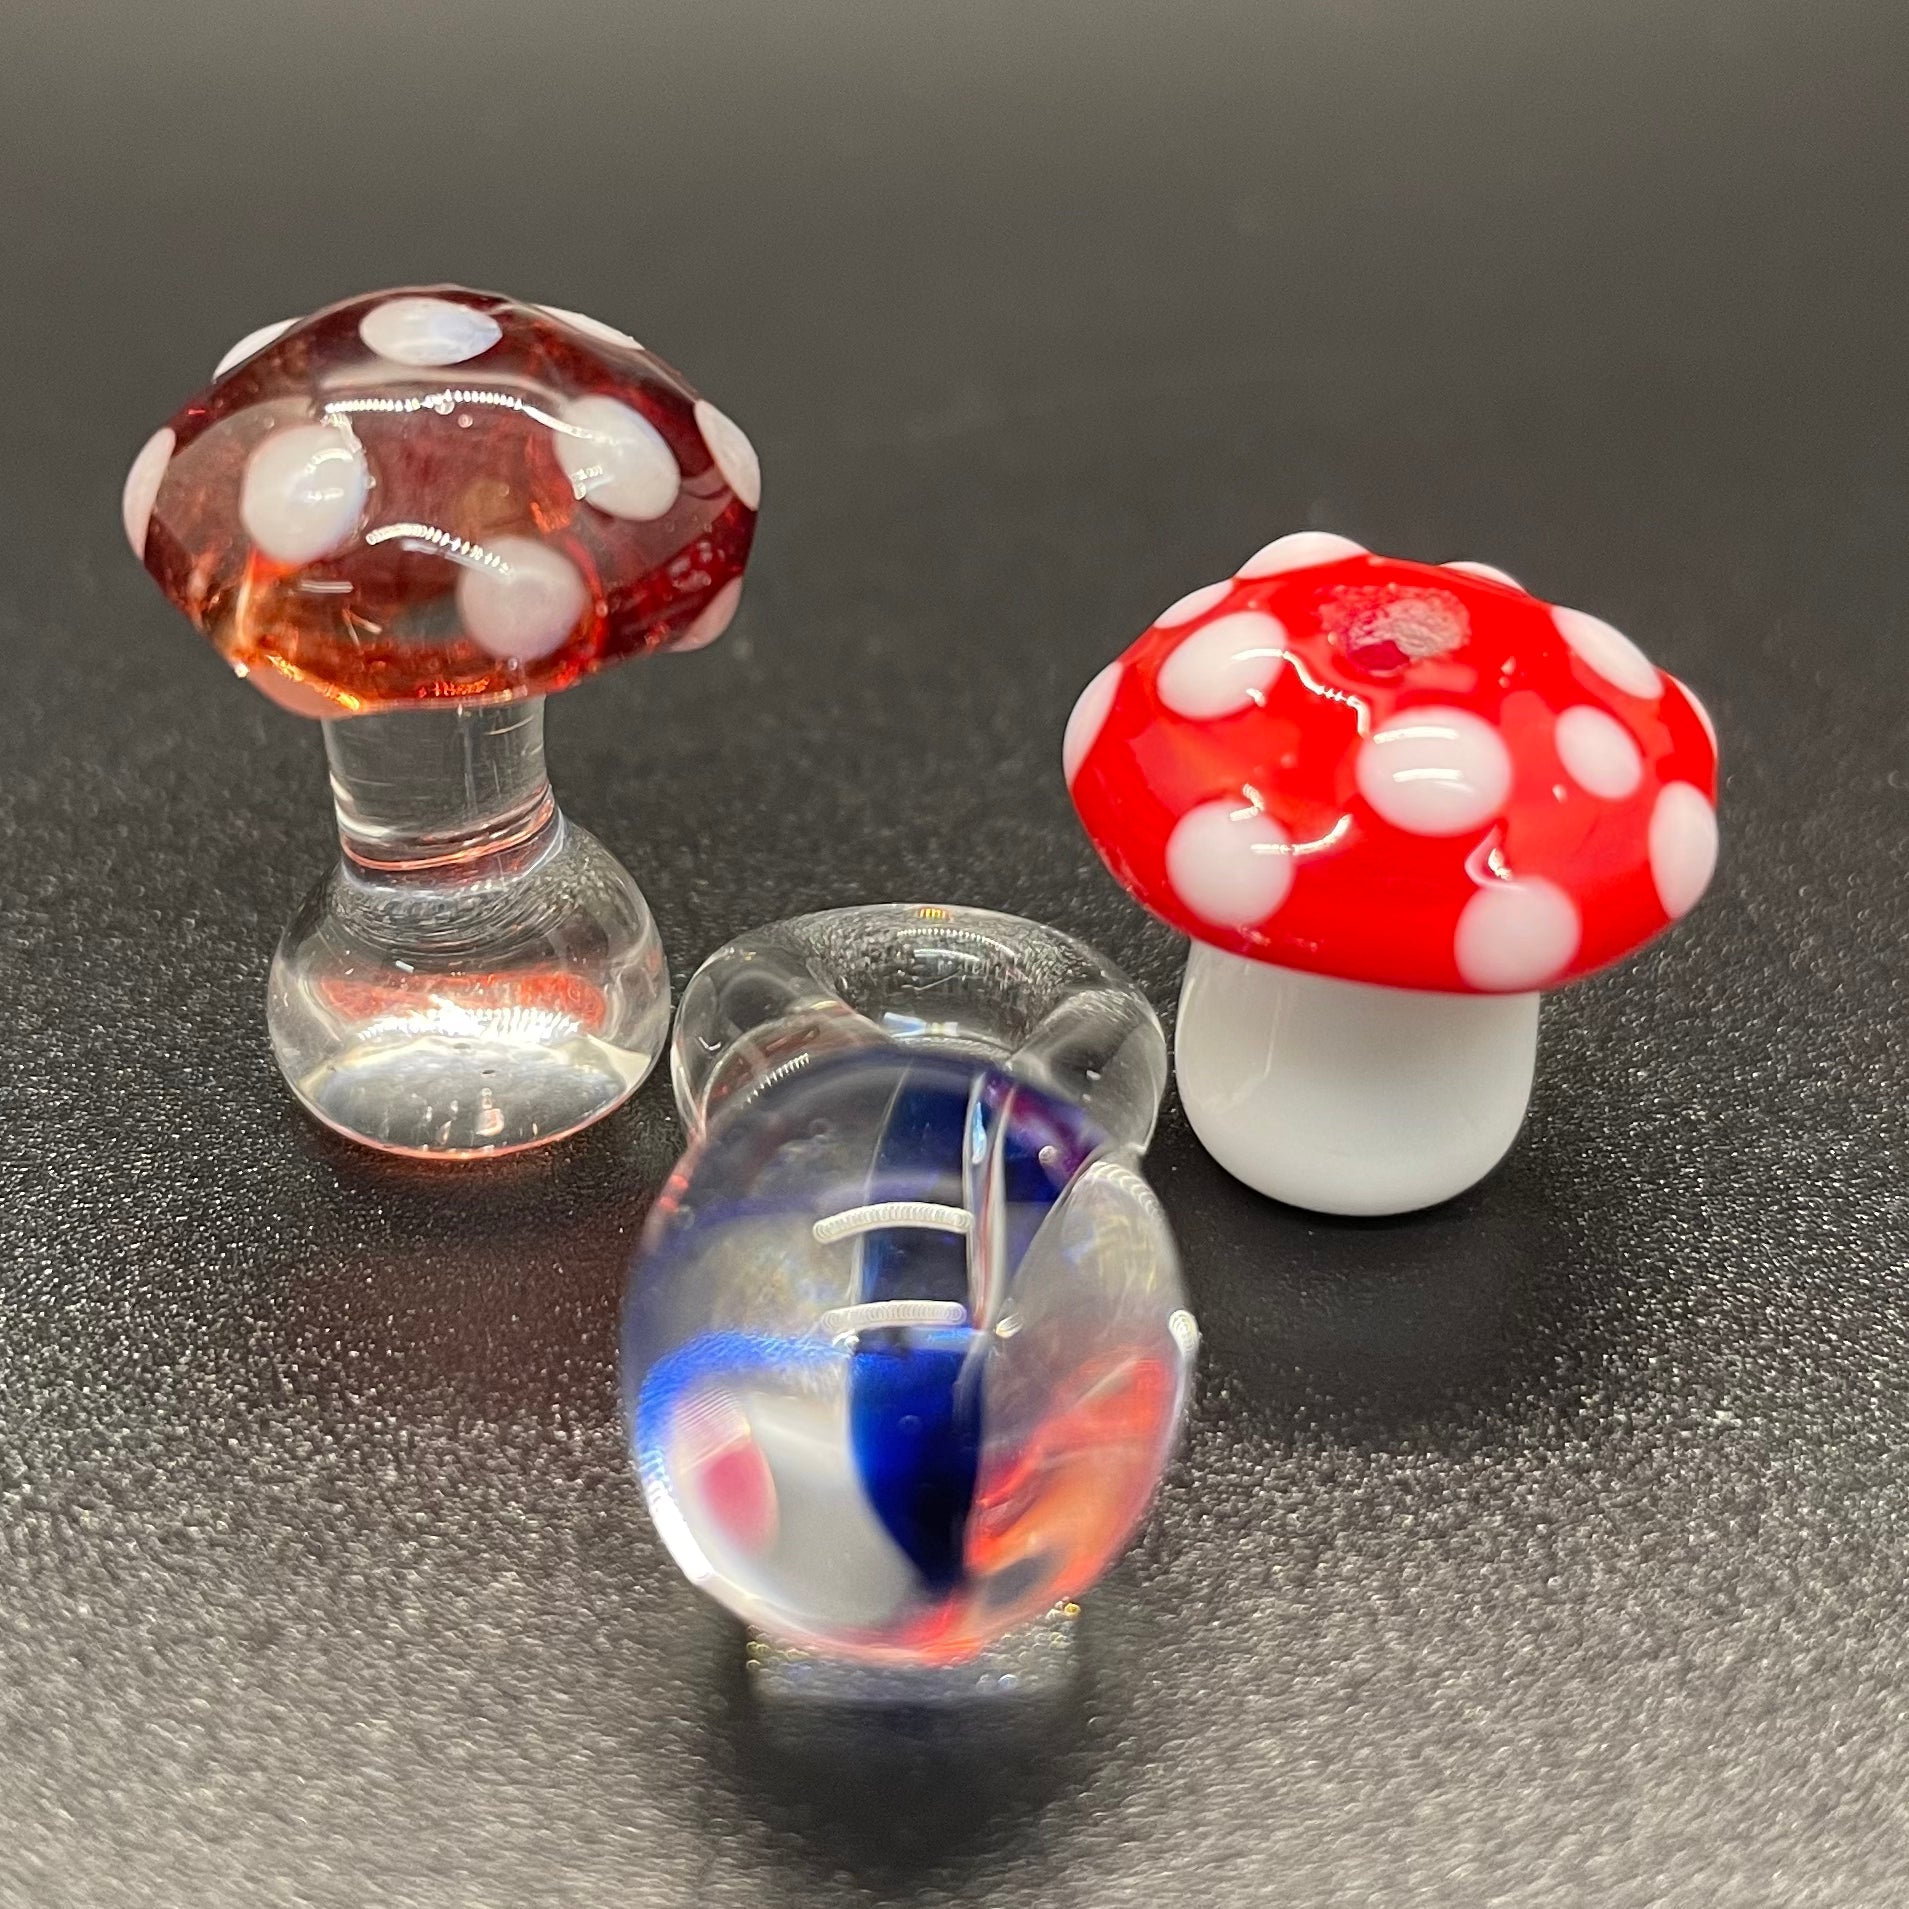 Intro to Solid Sculpture and Beadmaking: Mushrooms! Saturday April 6th 10am-1pm